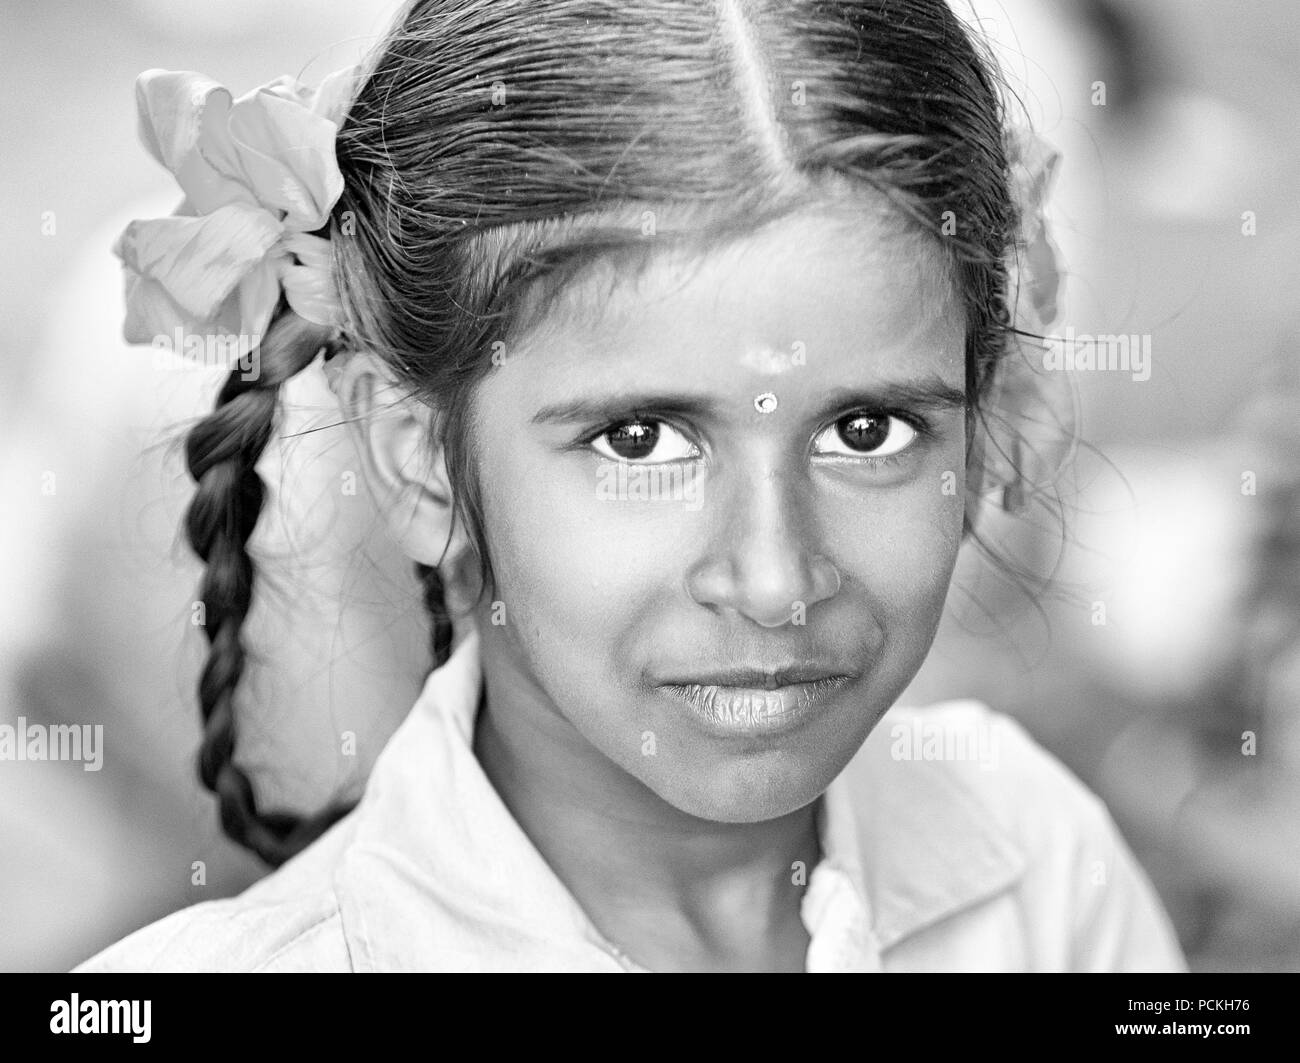 PONDICHERY, PUDUCHERRY, TAMIL NADU, INDIA - SEPTEMBER Circa, 2017. An unidentified poor girl in a small village, outdoor, looking at the camera. Black Stock Photo